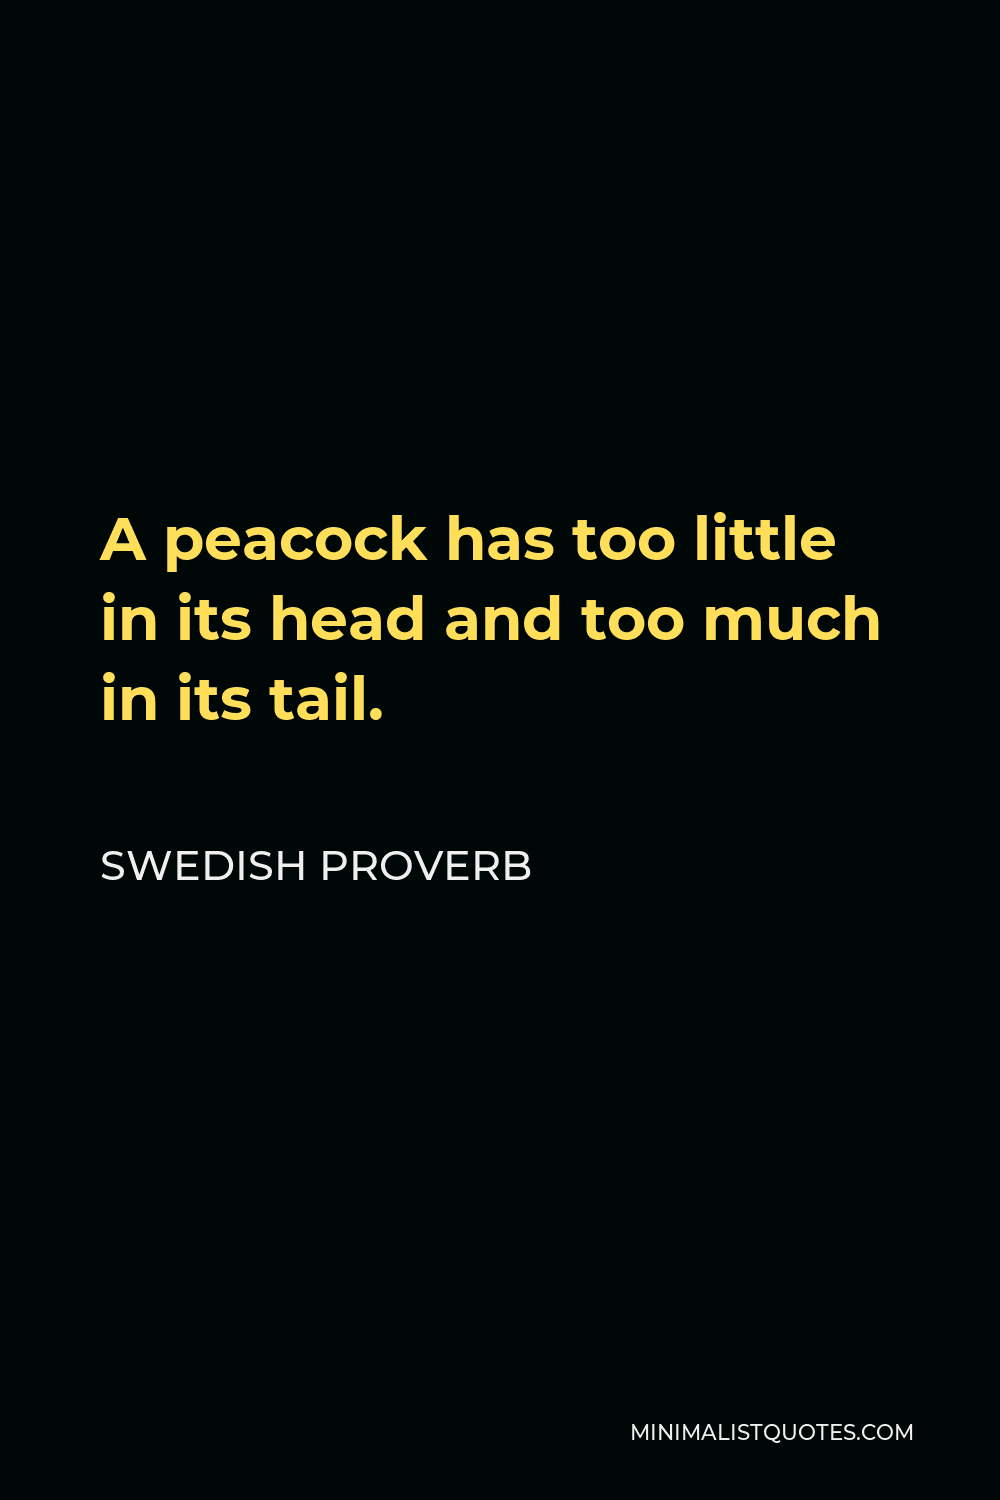 Swedish Proverb Quote - A peacock has too little in its head and too much in its tail.